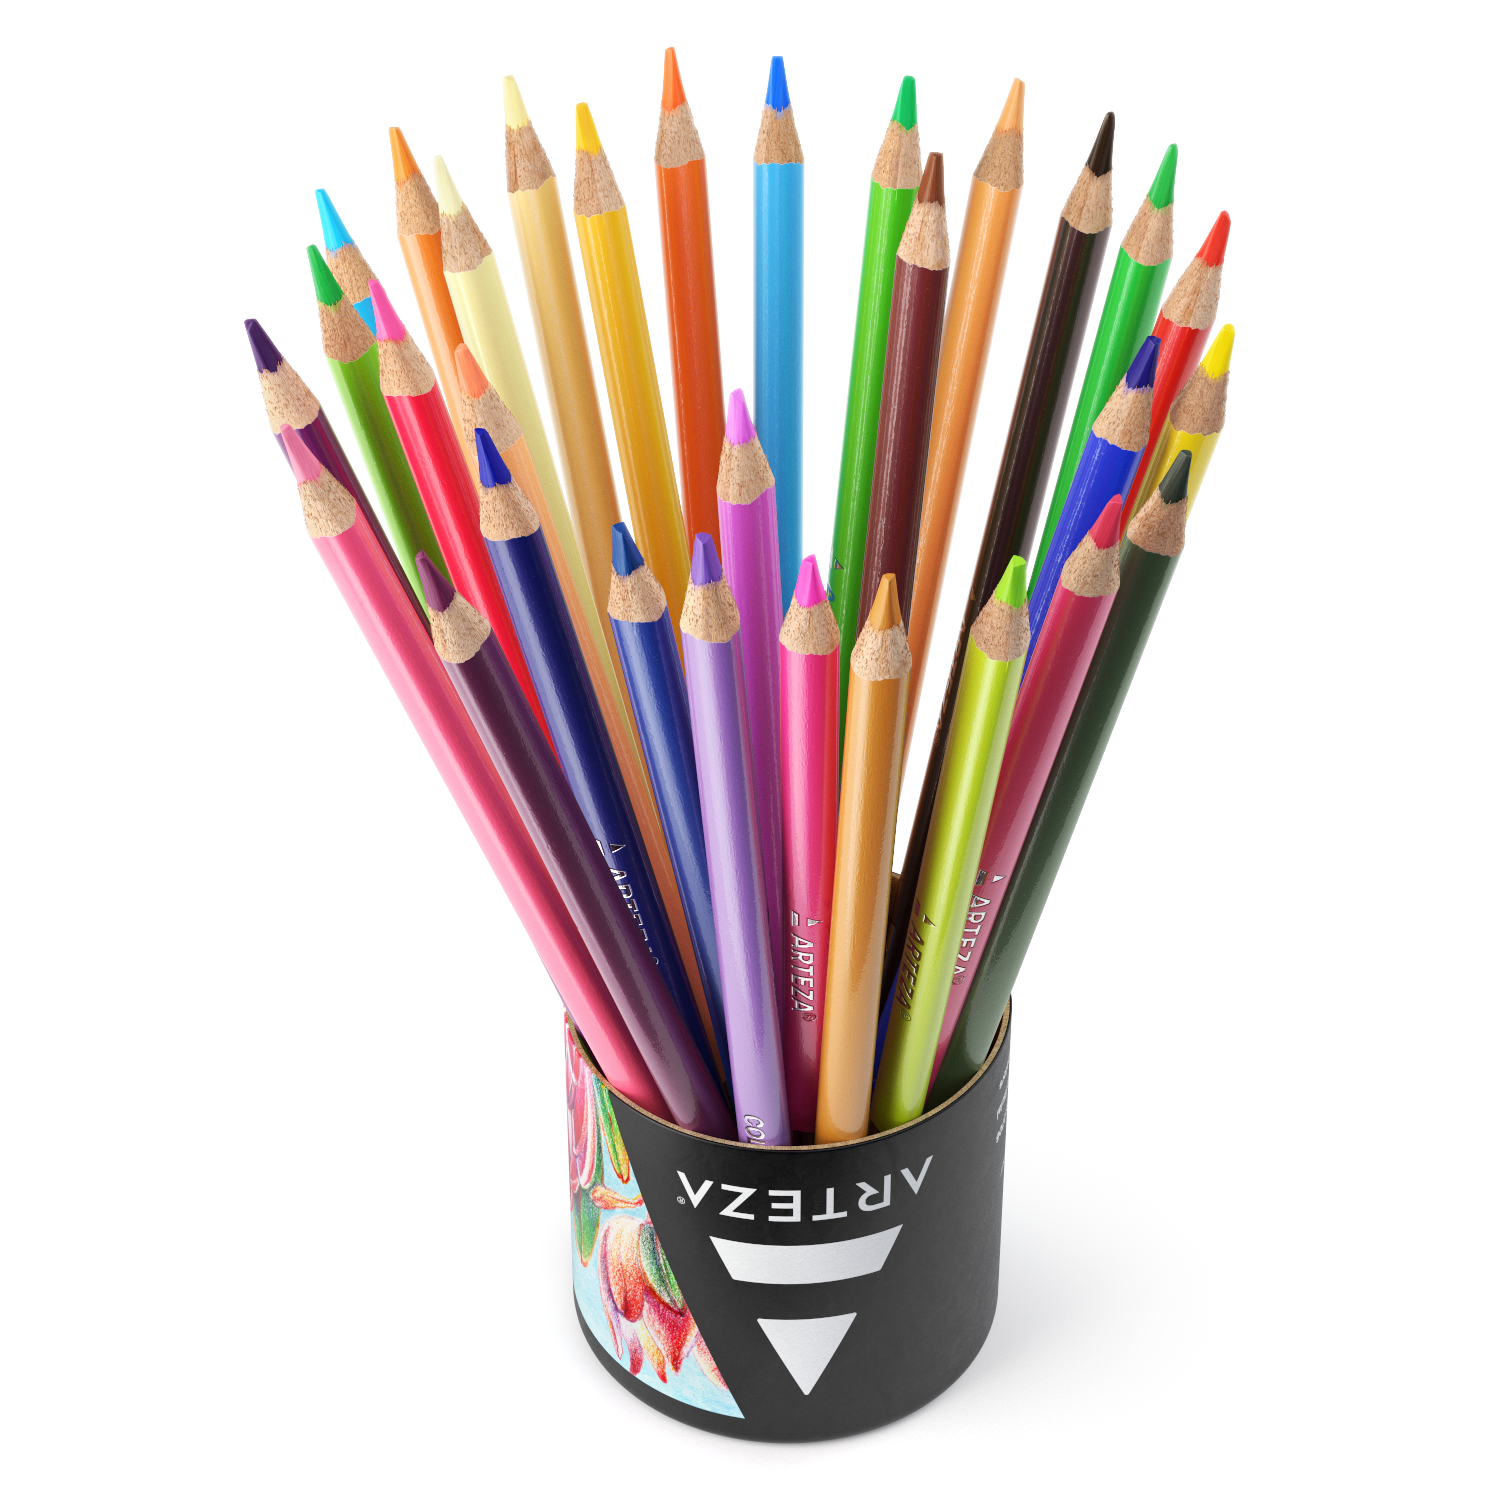 Maped Color'Peps Triangular Colored Pencils, Pack of 48